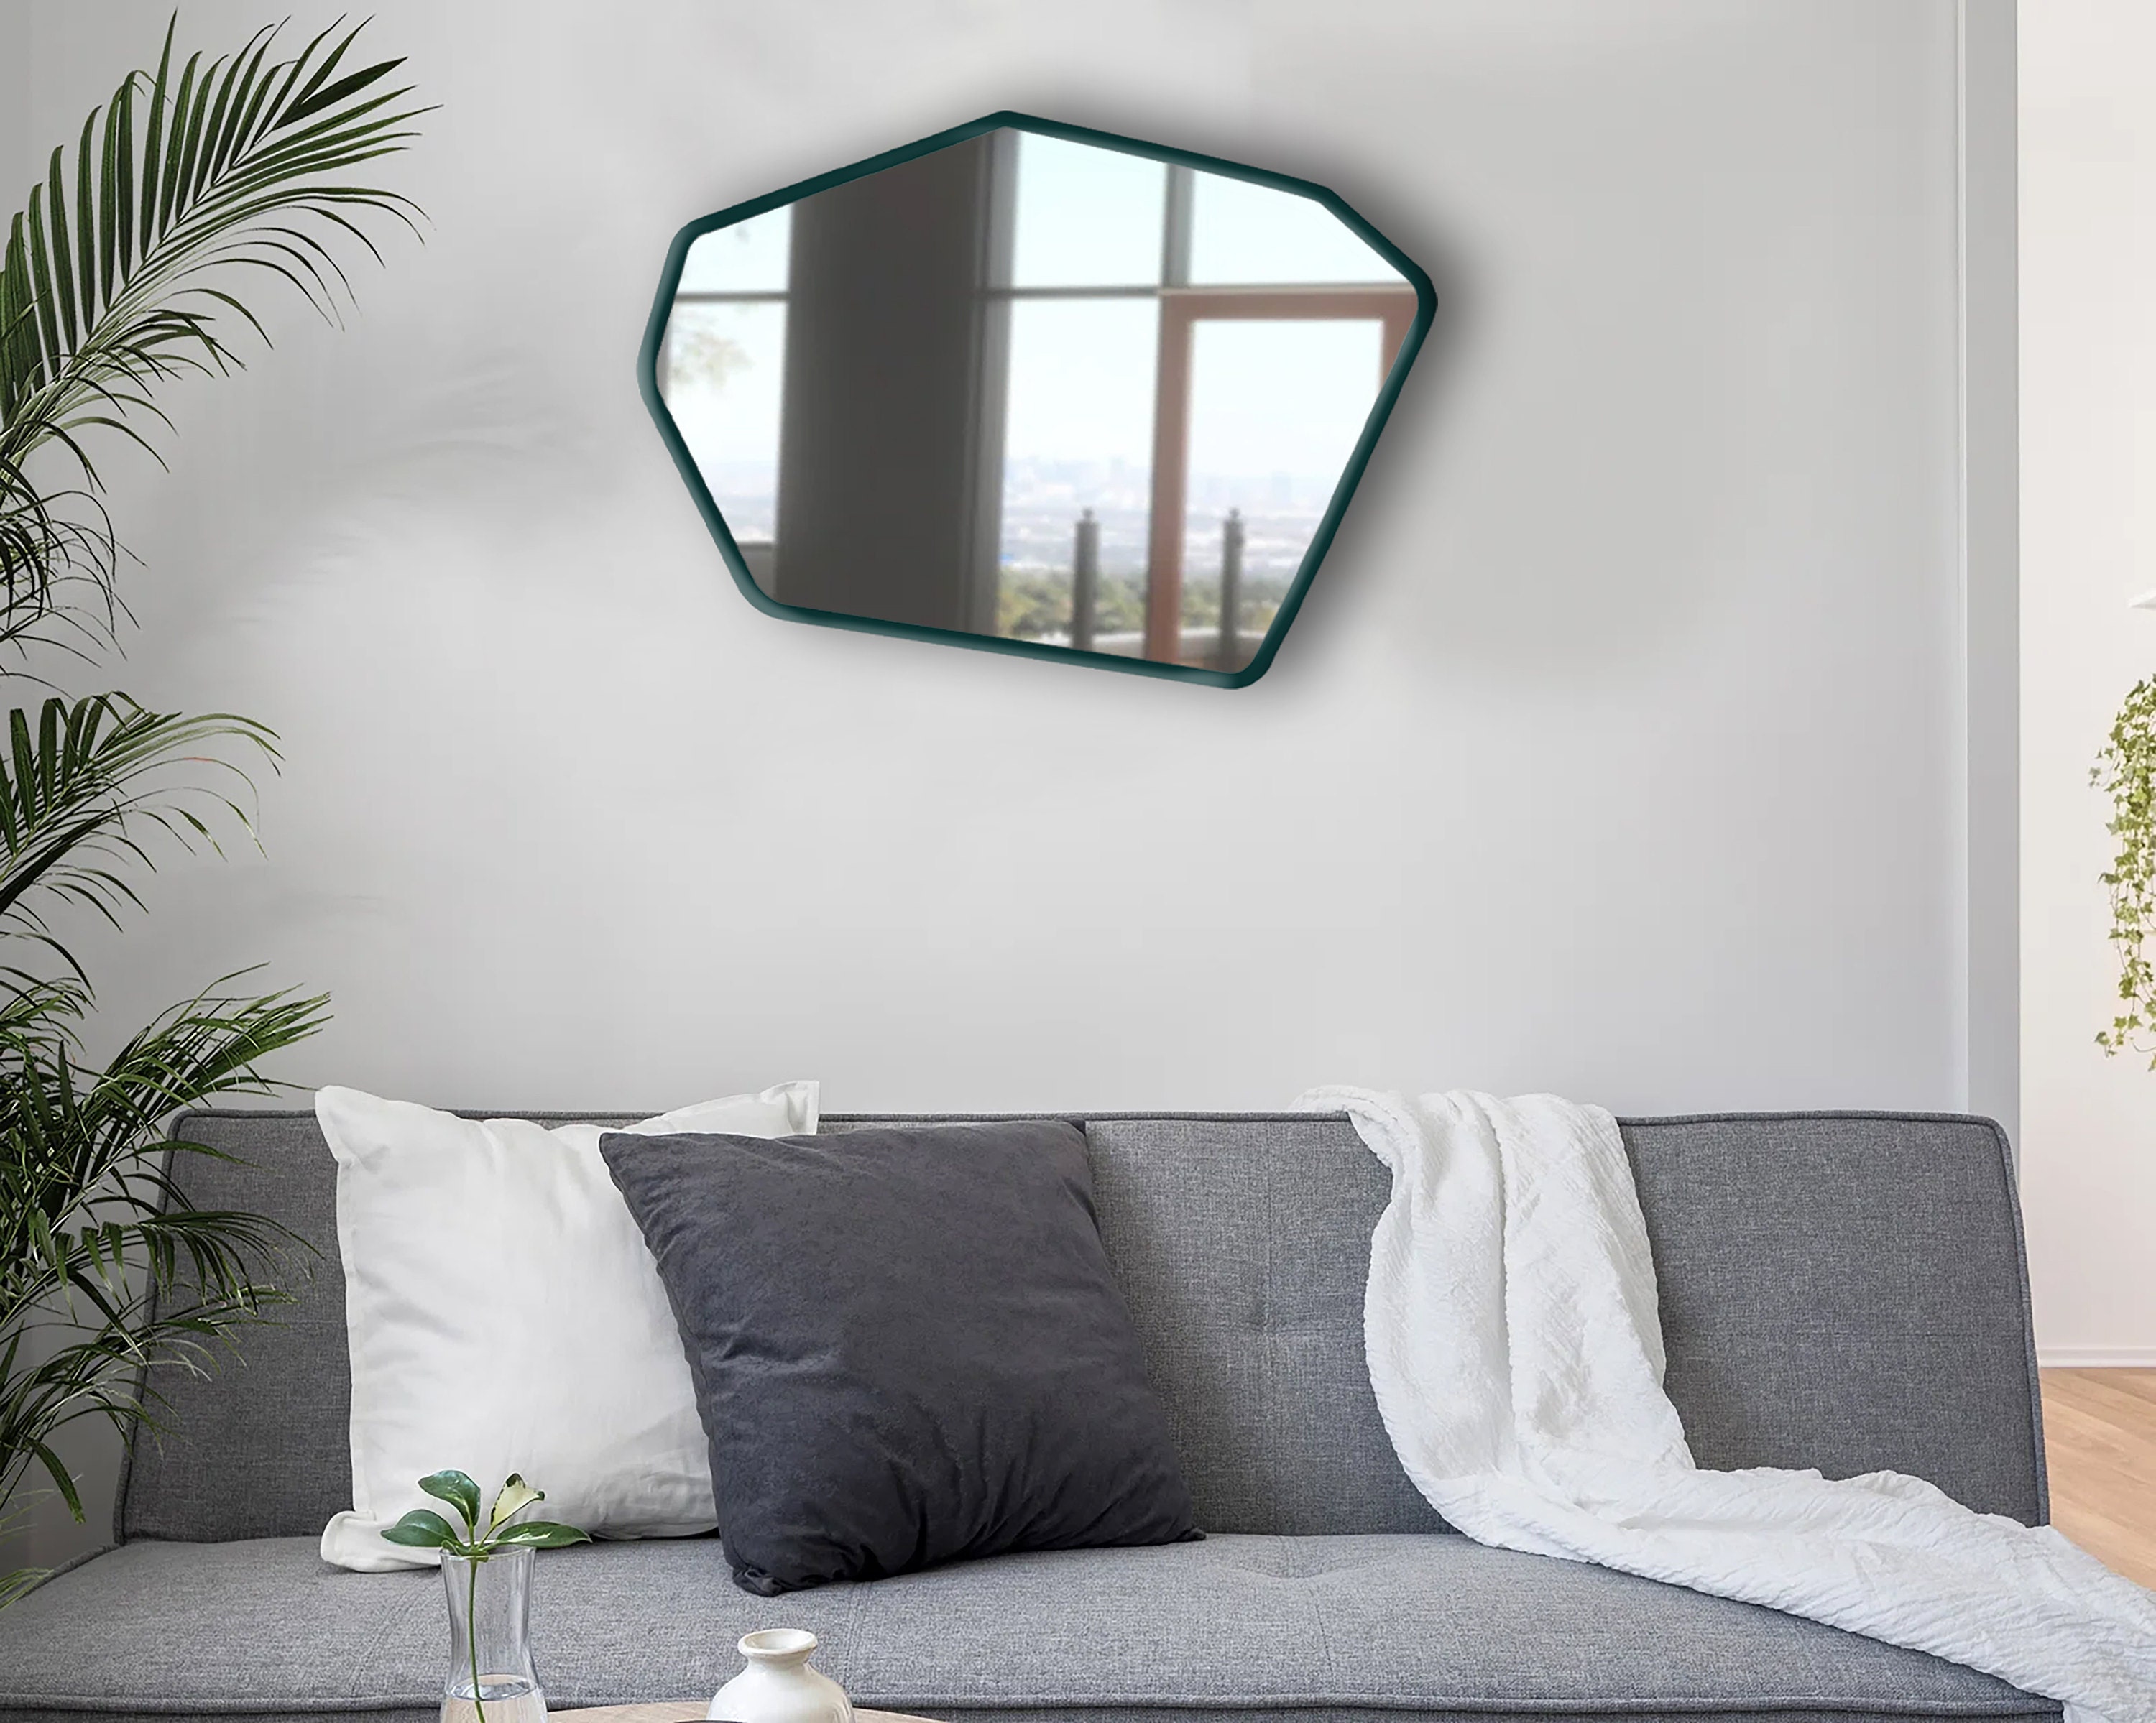 Edgy asymmetrical mirror hung on a living room wall above a couch.